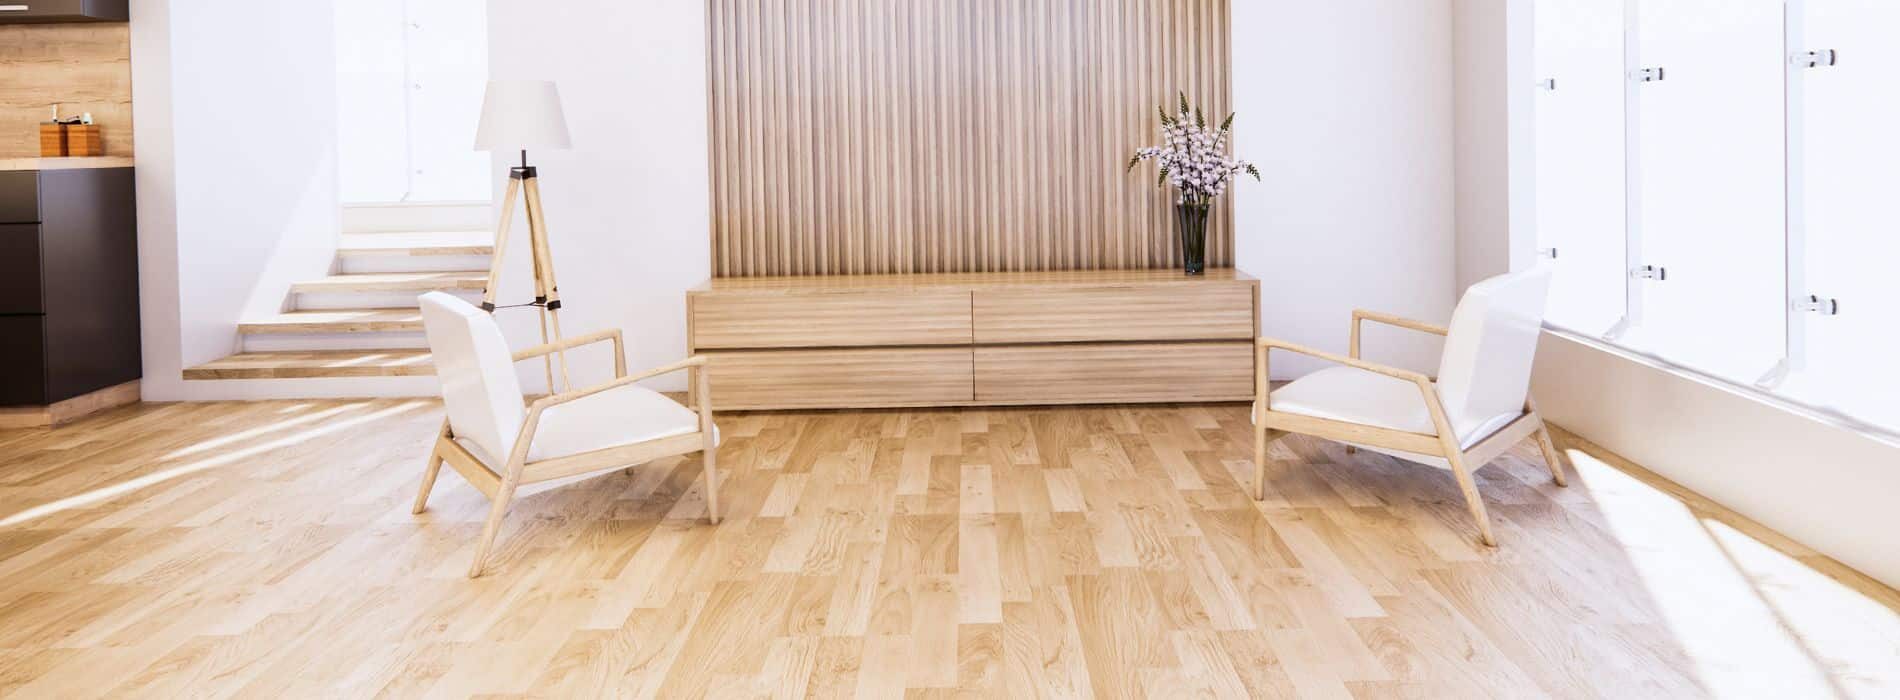 Stunning 6-year-old hardwood parquet floor expertly restored in Lambeth, SE11. Bona 2.5K Frost whitewashing and Traffic HD 25% sheen matte lacquer were applied by Mr Sander®, ensuring durability and long-lasting beauty